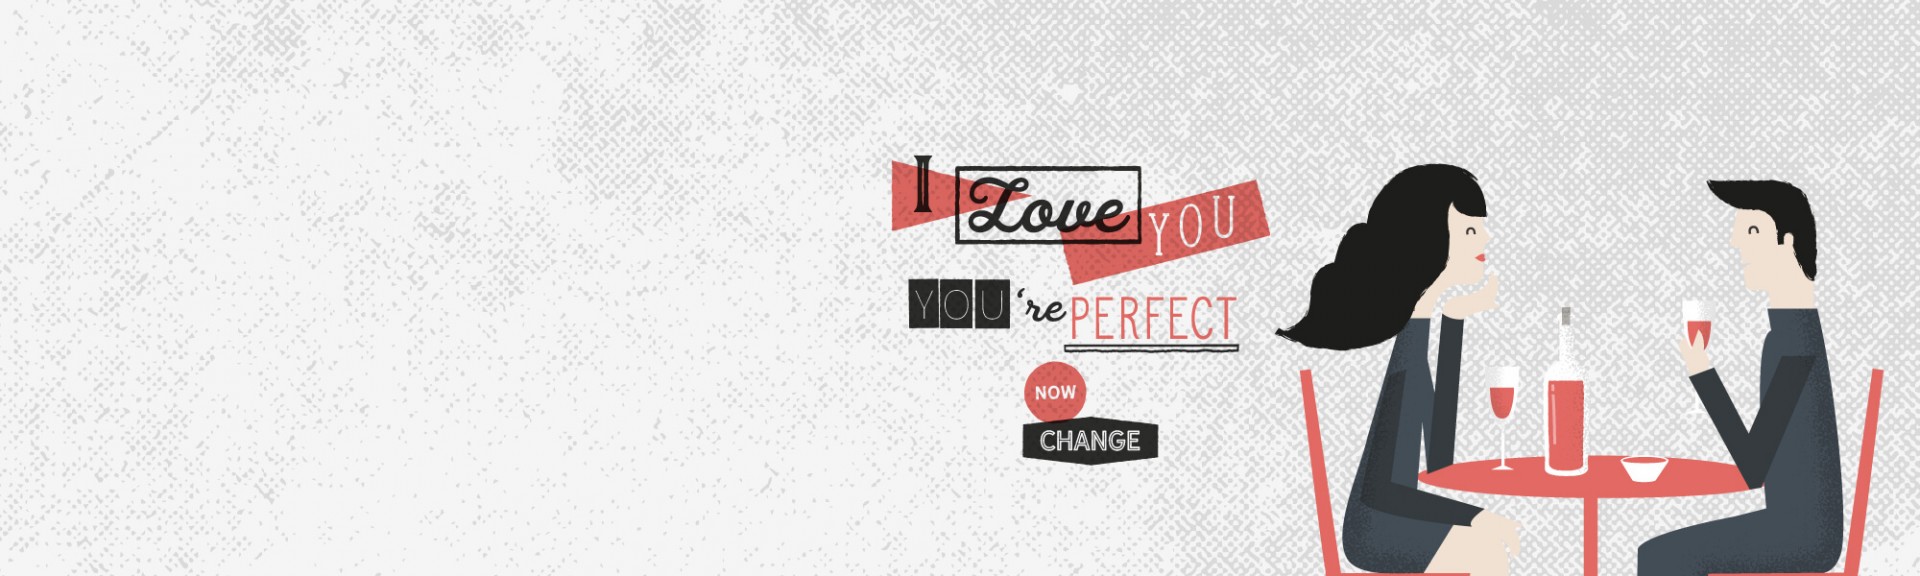 I love you, you're perfect, now change